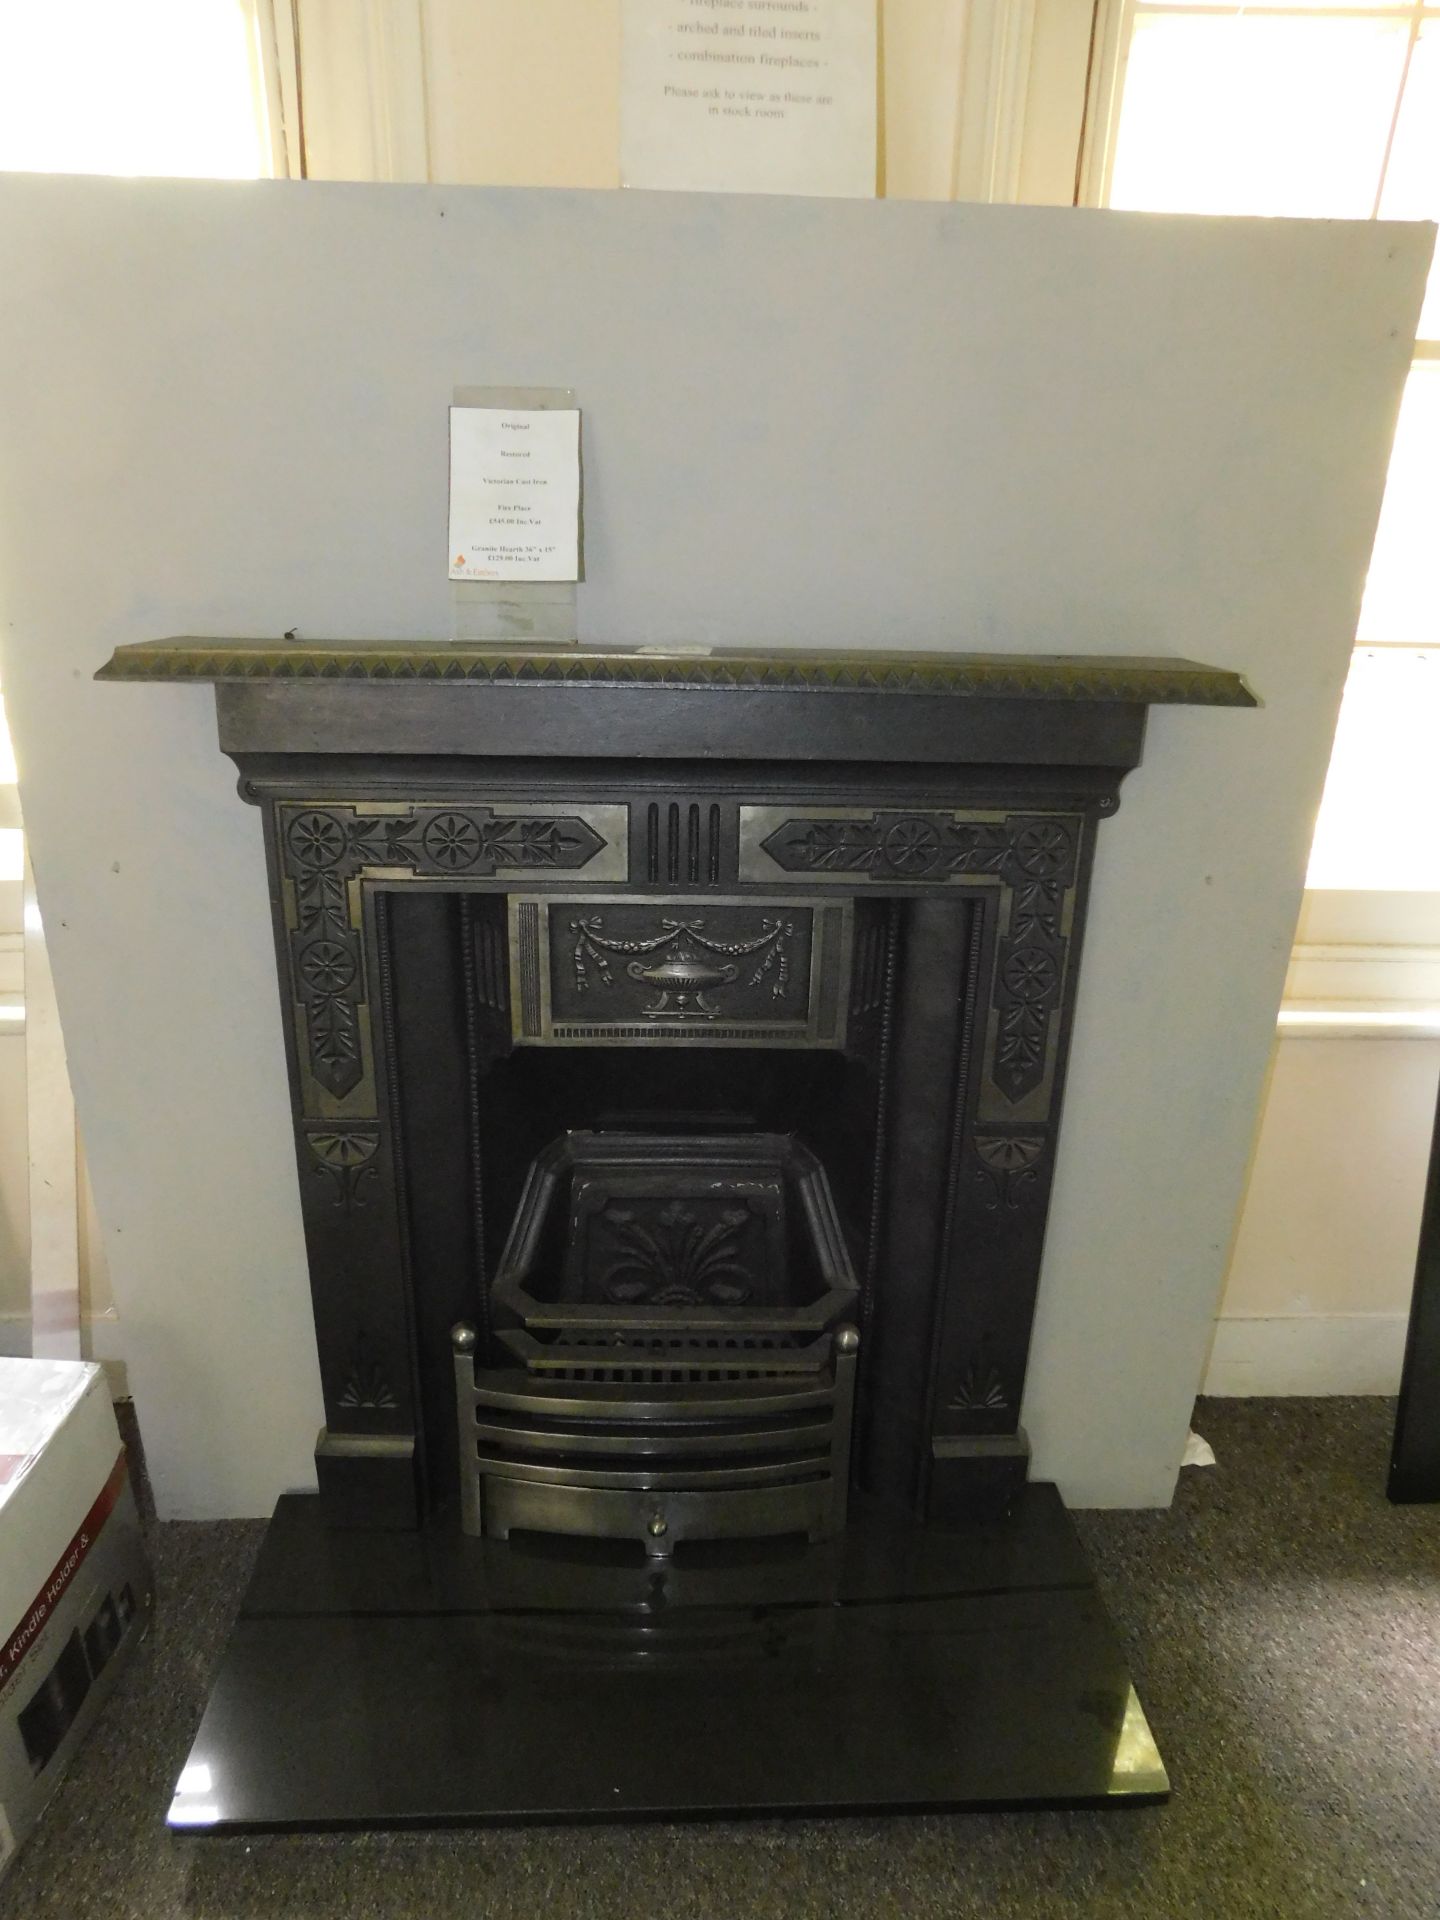 Ex-Display Victorian Cast Iron Fireplace Surround with Granite Hearth & Grate (Where the company’s